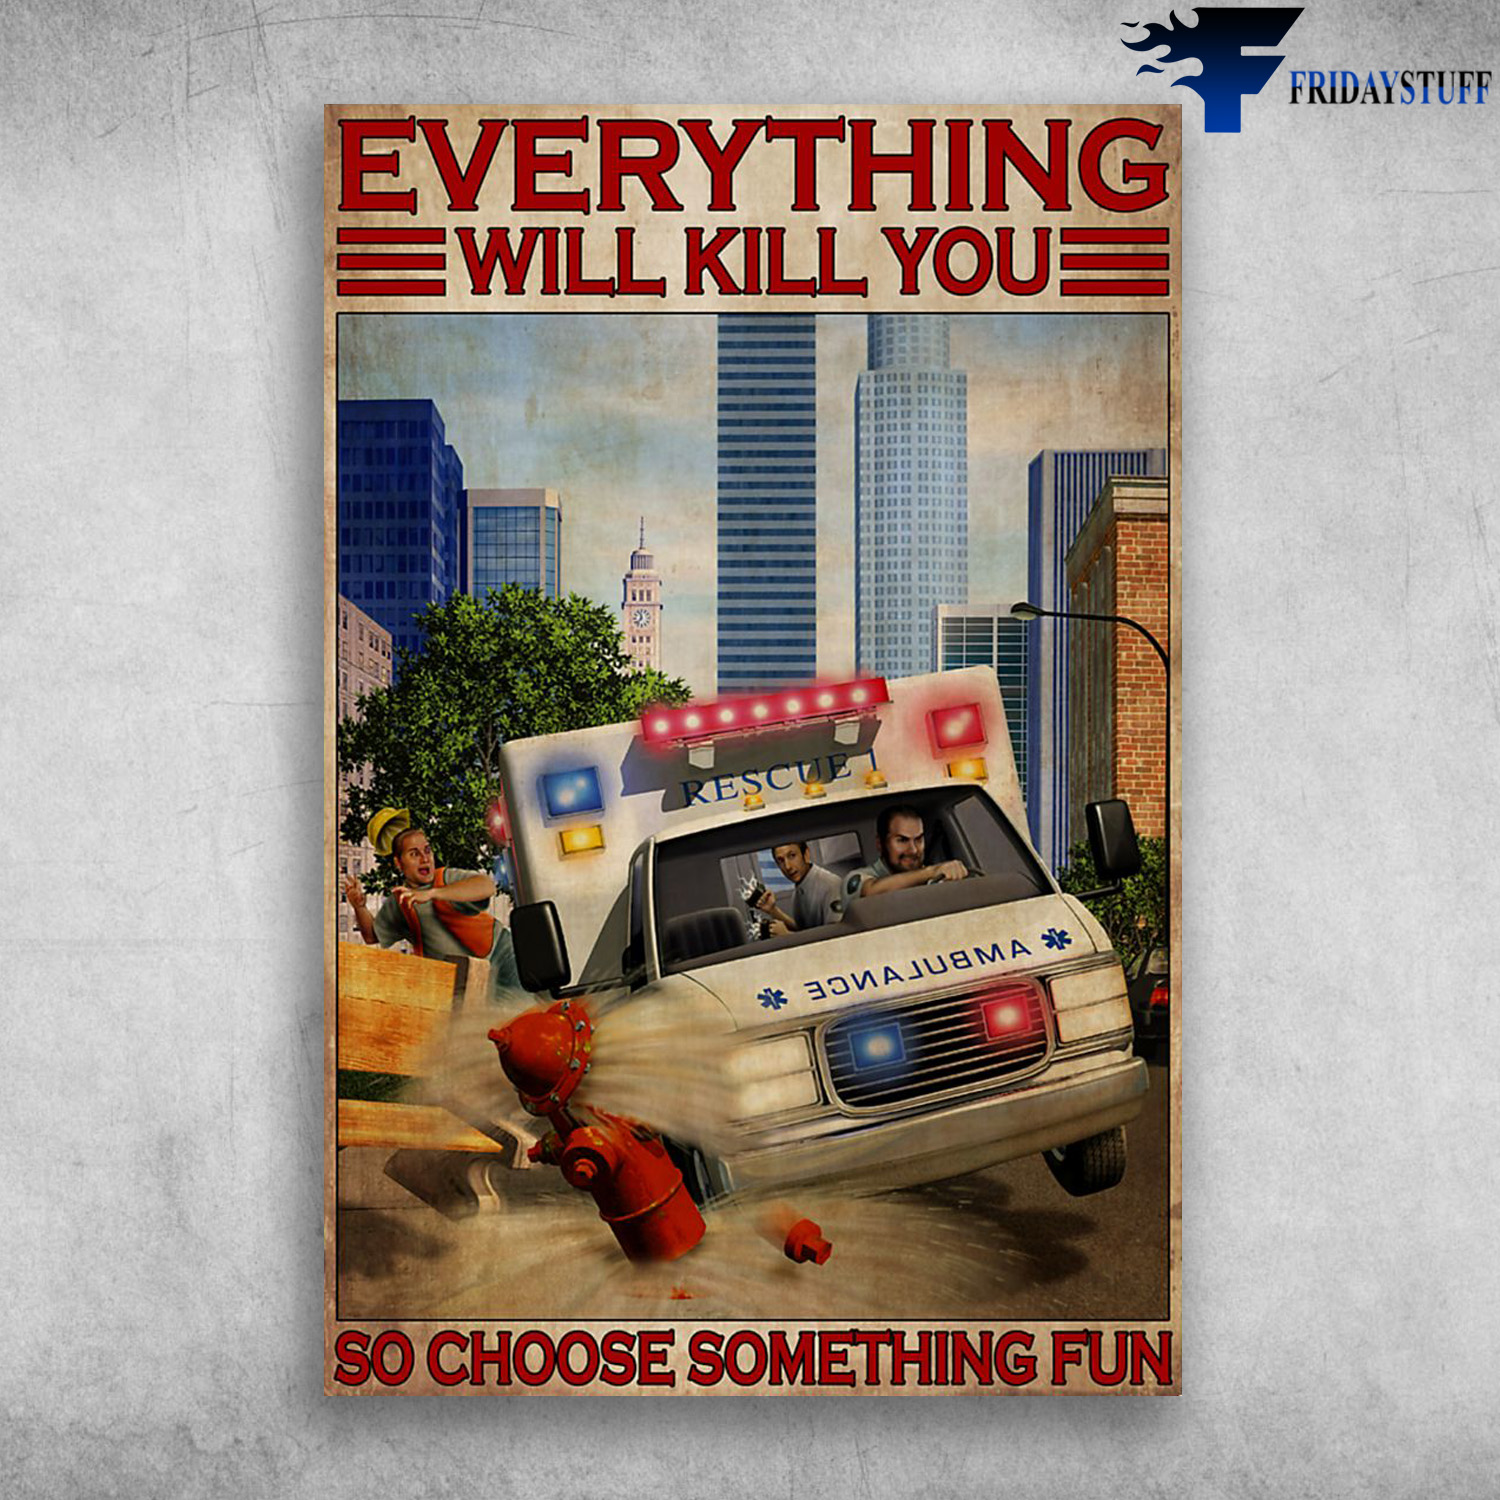 The Paramedic In Ambulance - Everything Will Kill You, So Choose Something Fun